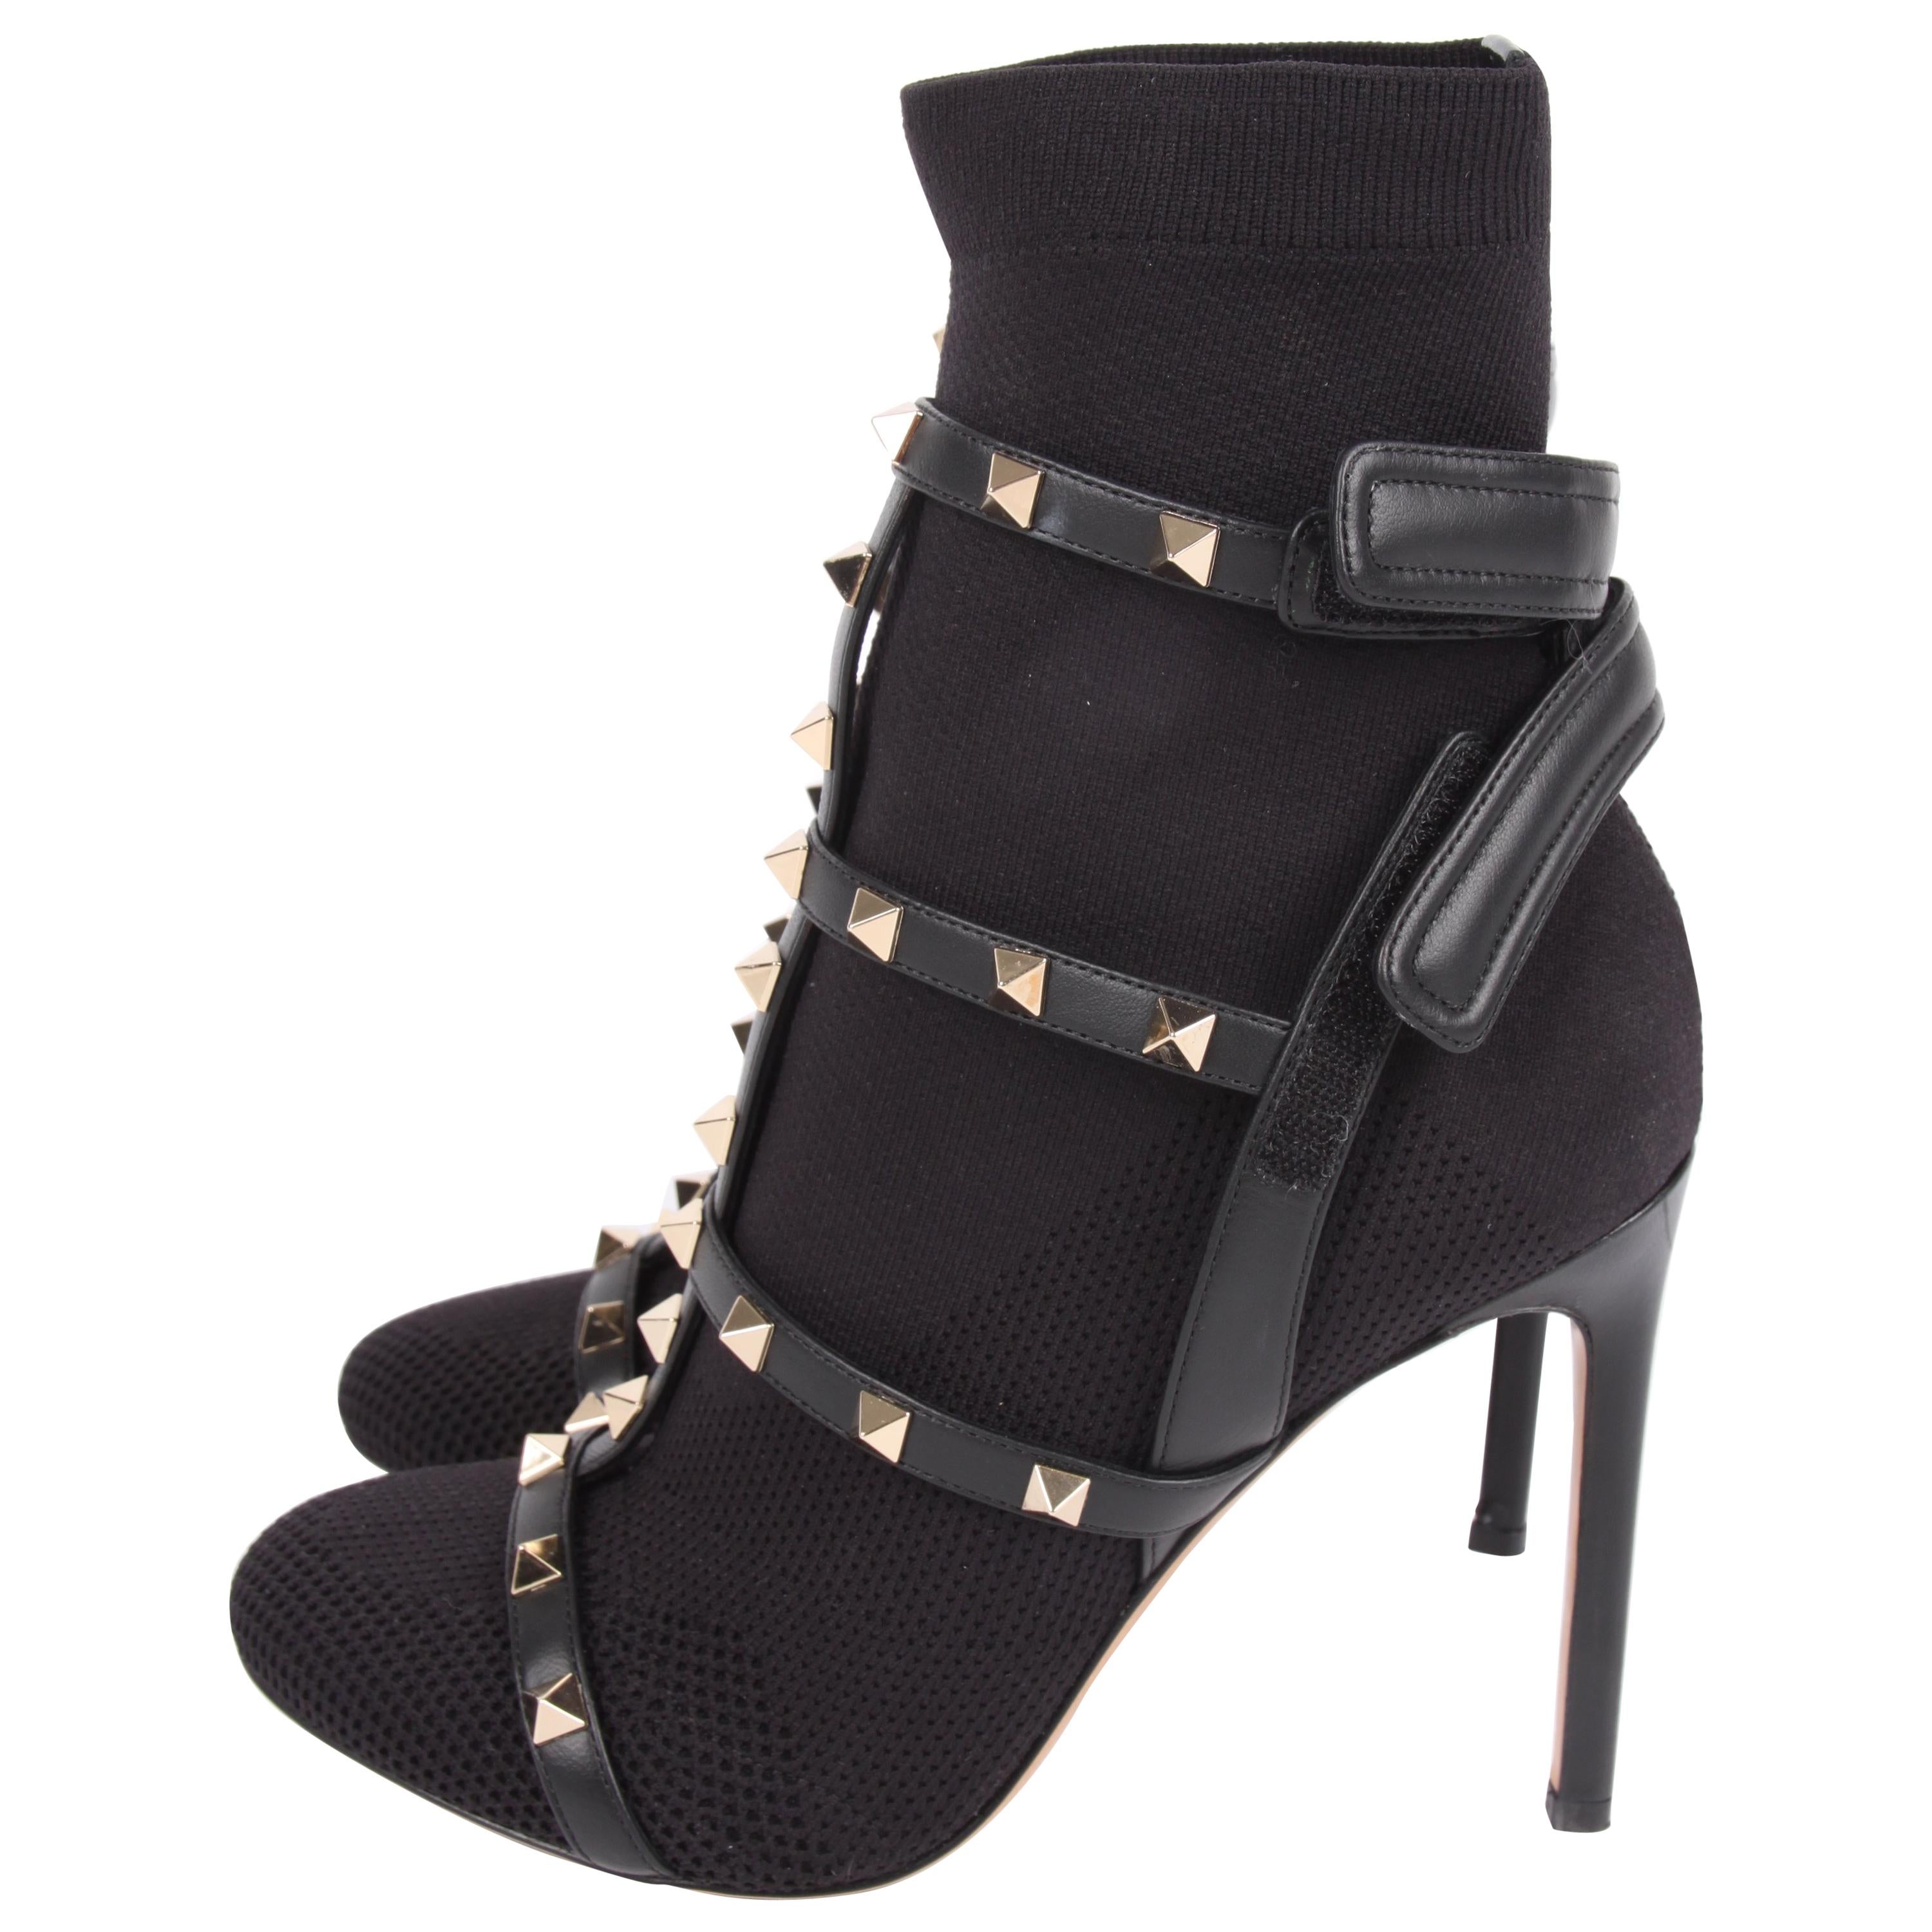 Valentino Rockstuds Sock Booties - black/gold For Sale